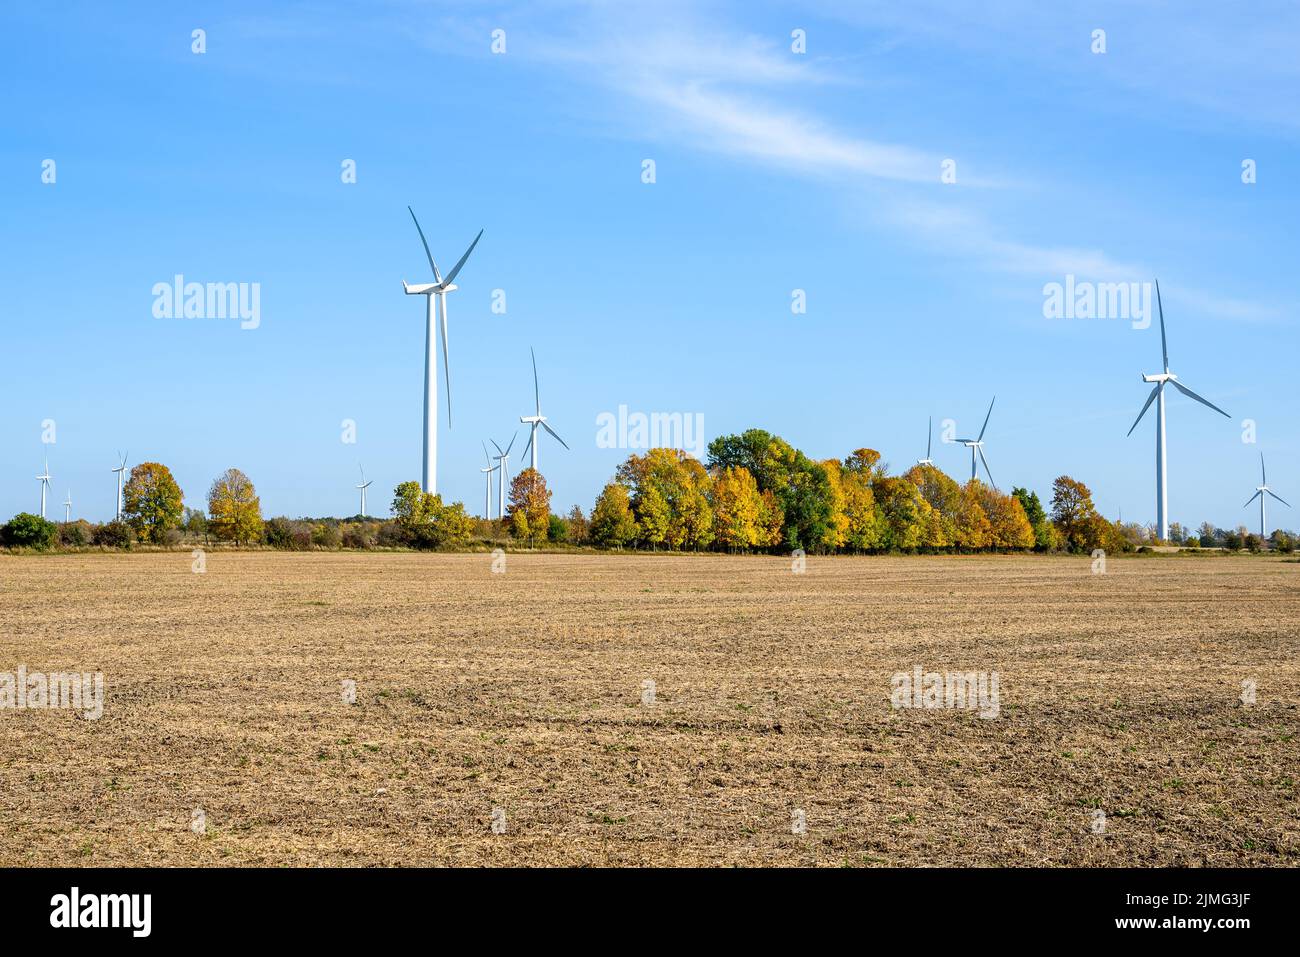 Wind turbines in a rural landsca[e on a sunny autumn day Stock Photo